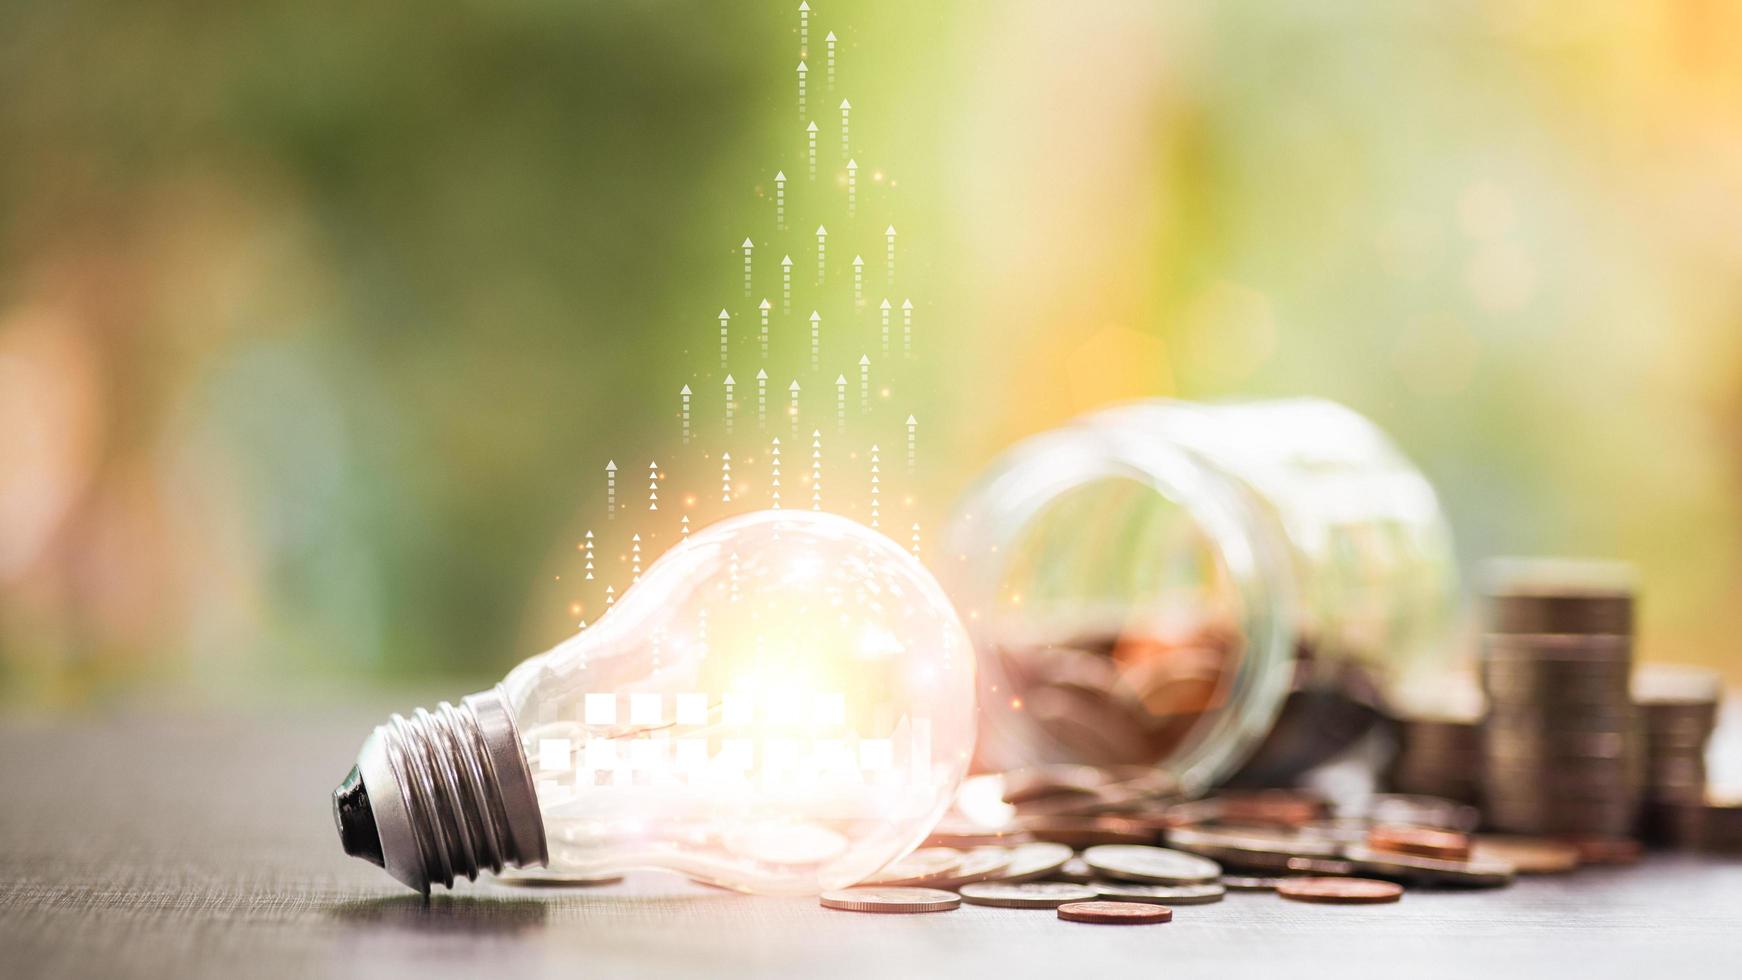 Light bulbs and coins, ideas planning to save. for the development of investment ideas by using innovation to manage a business to grow and succeed with a focus on profit, financial and banking, photo